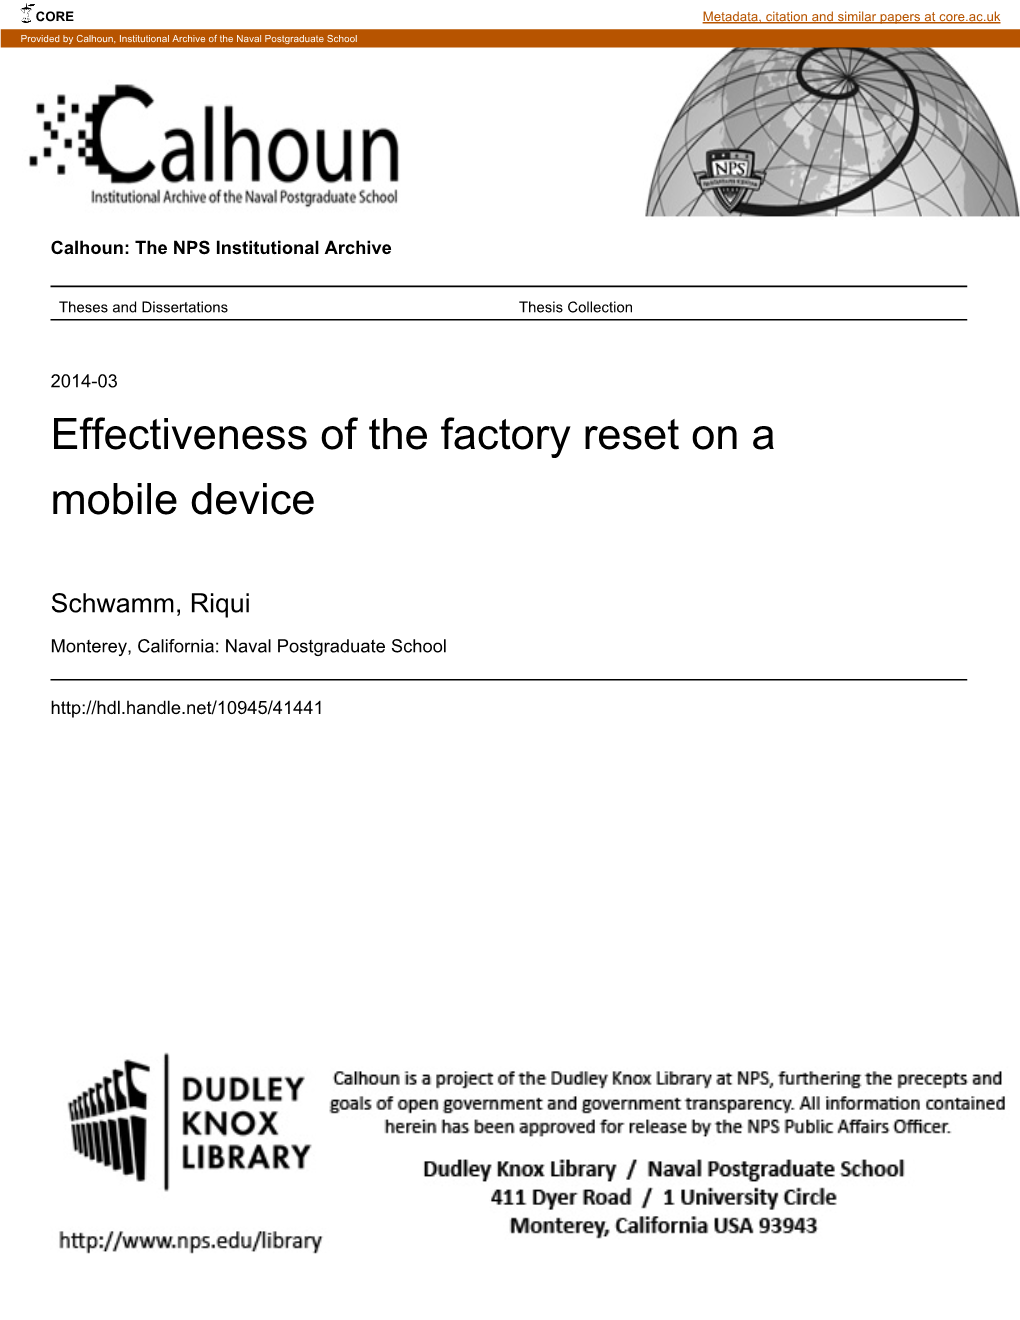 Effectiveness of the Factory Reset on a Mobile Device